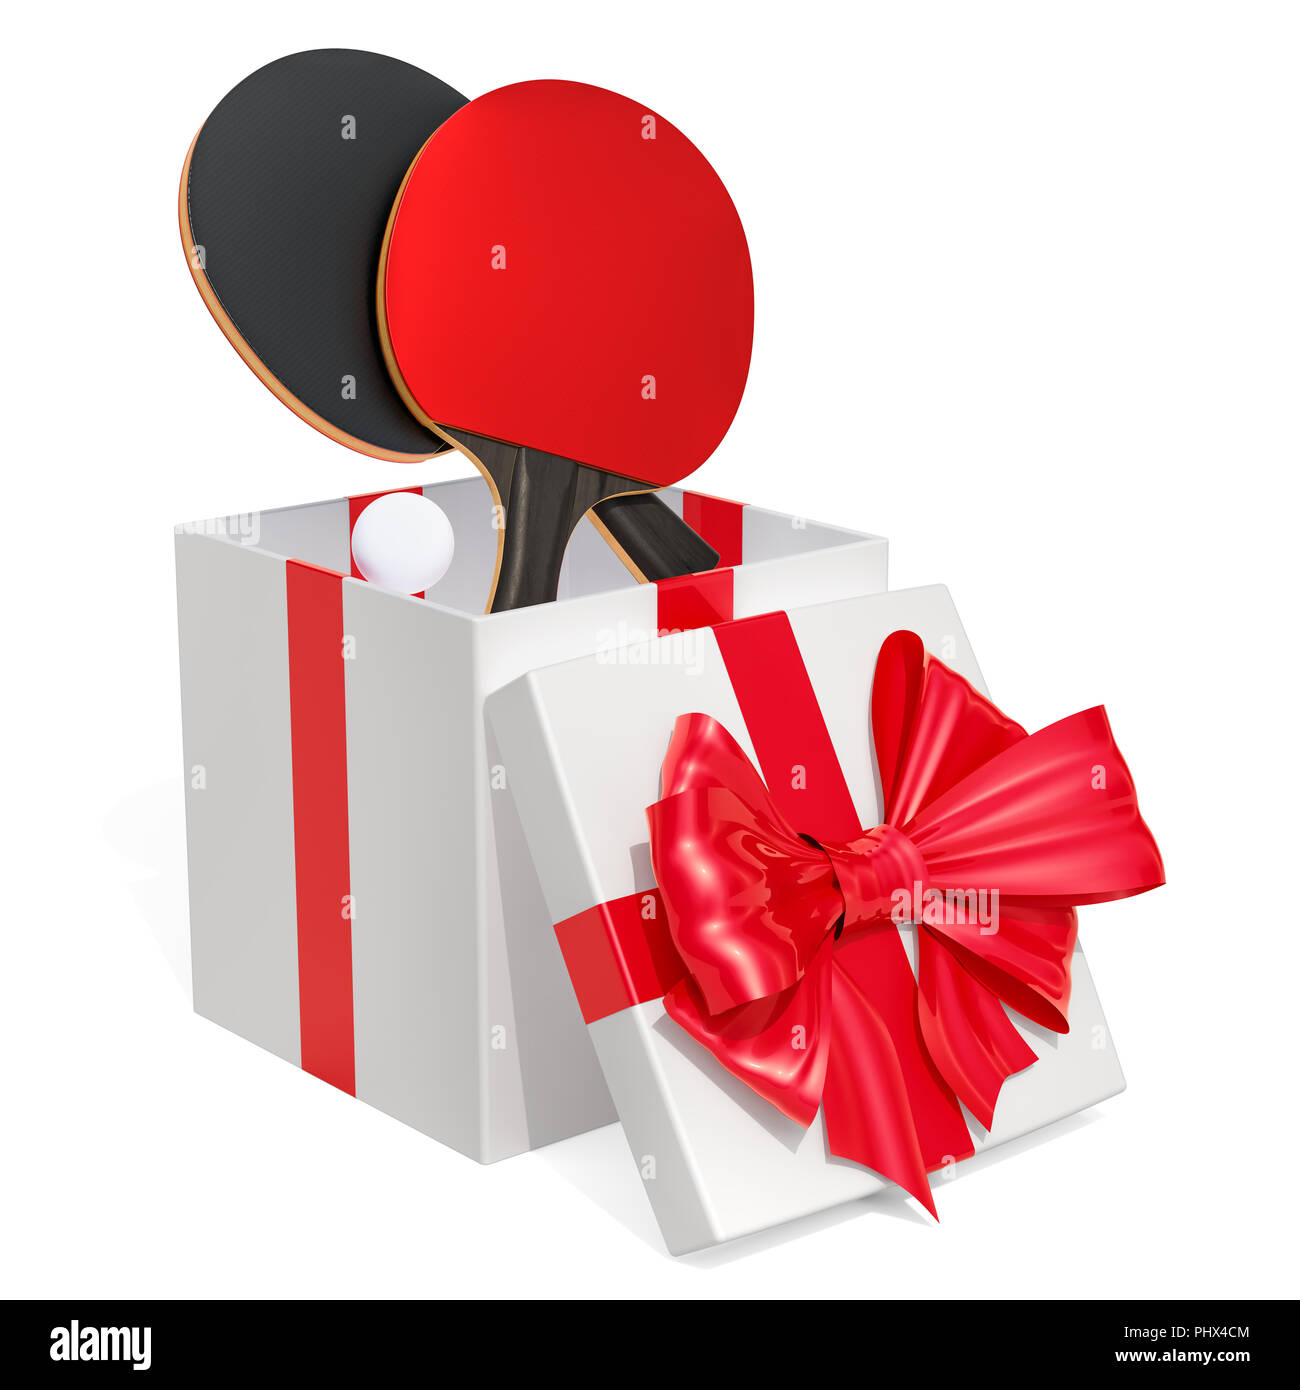 Gift concept, table tennis inside gift box. 3D rendering isolated on white background Stock Photo